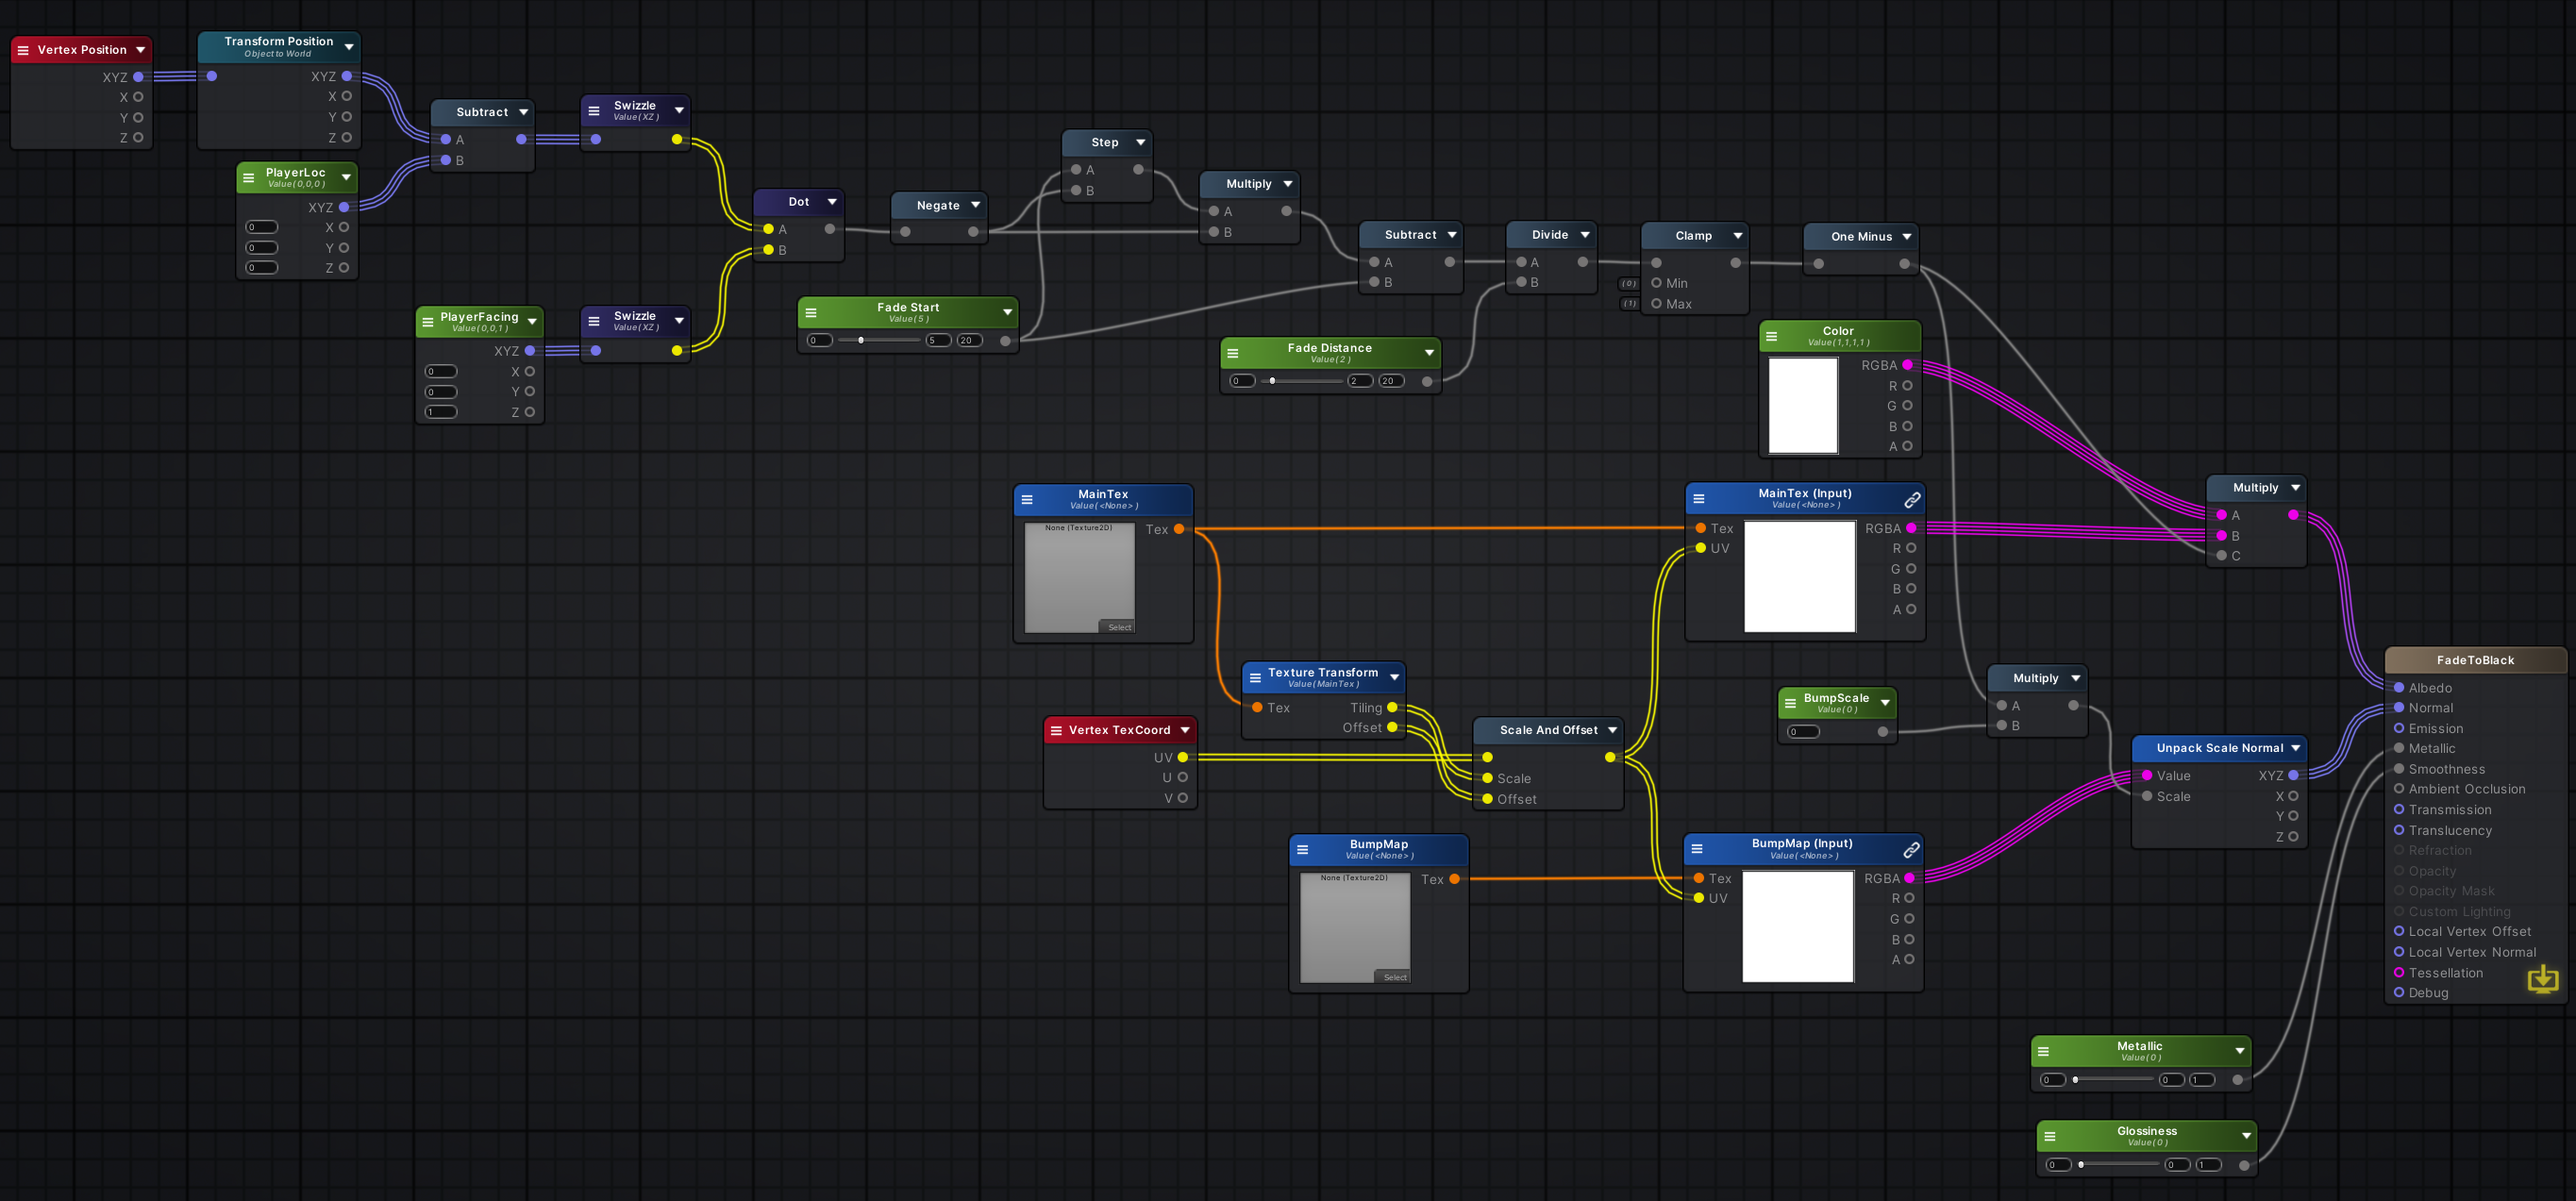 A screenshot showing the visual layout of the Fade to Black shader.